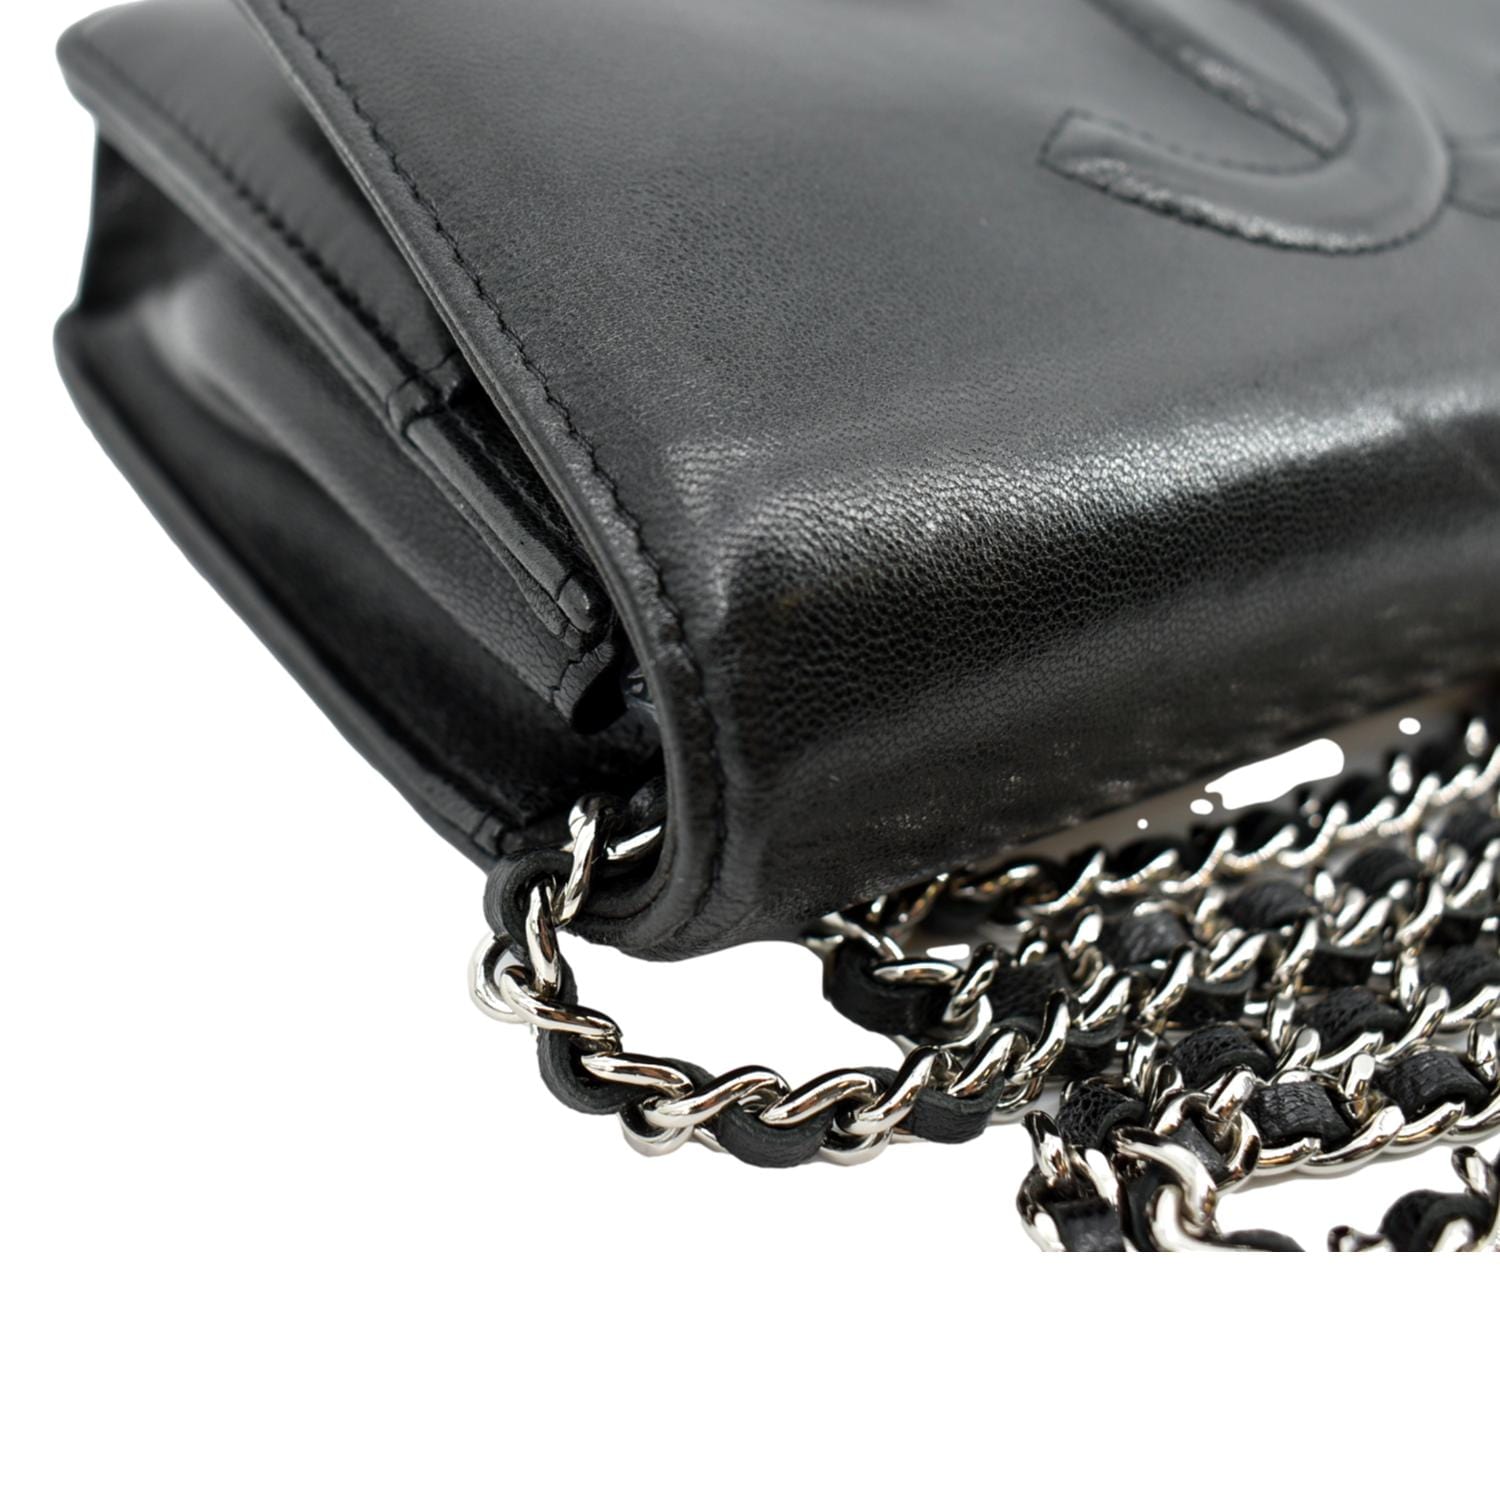 Chanel Silver Quilted Leather Chain Around Boy WOC Clutch Bag W